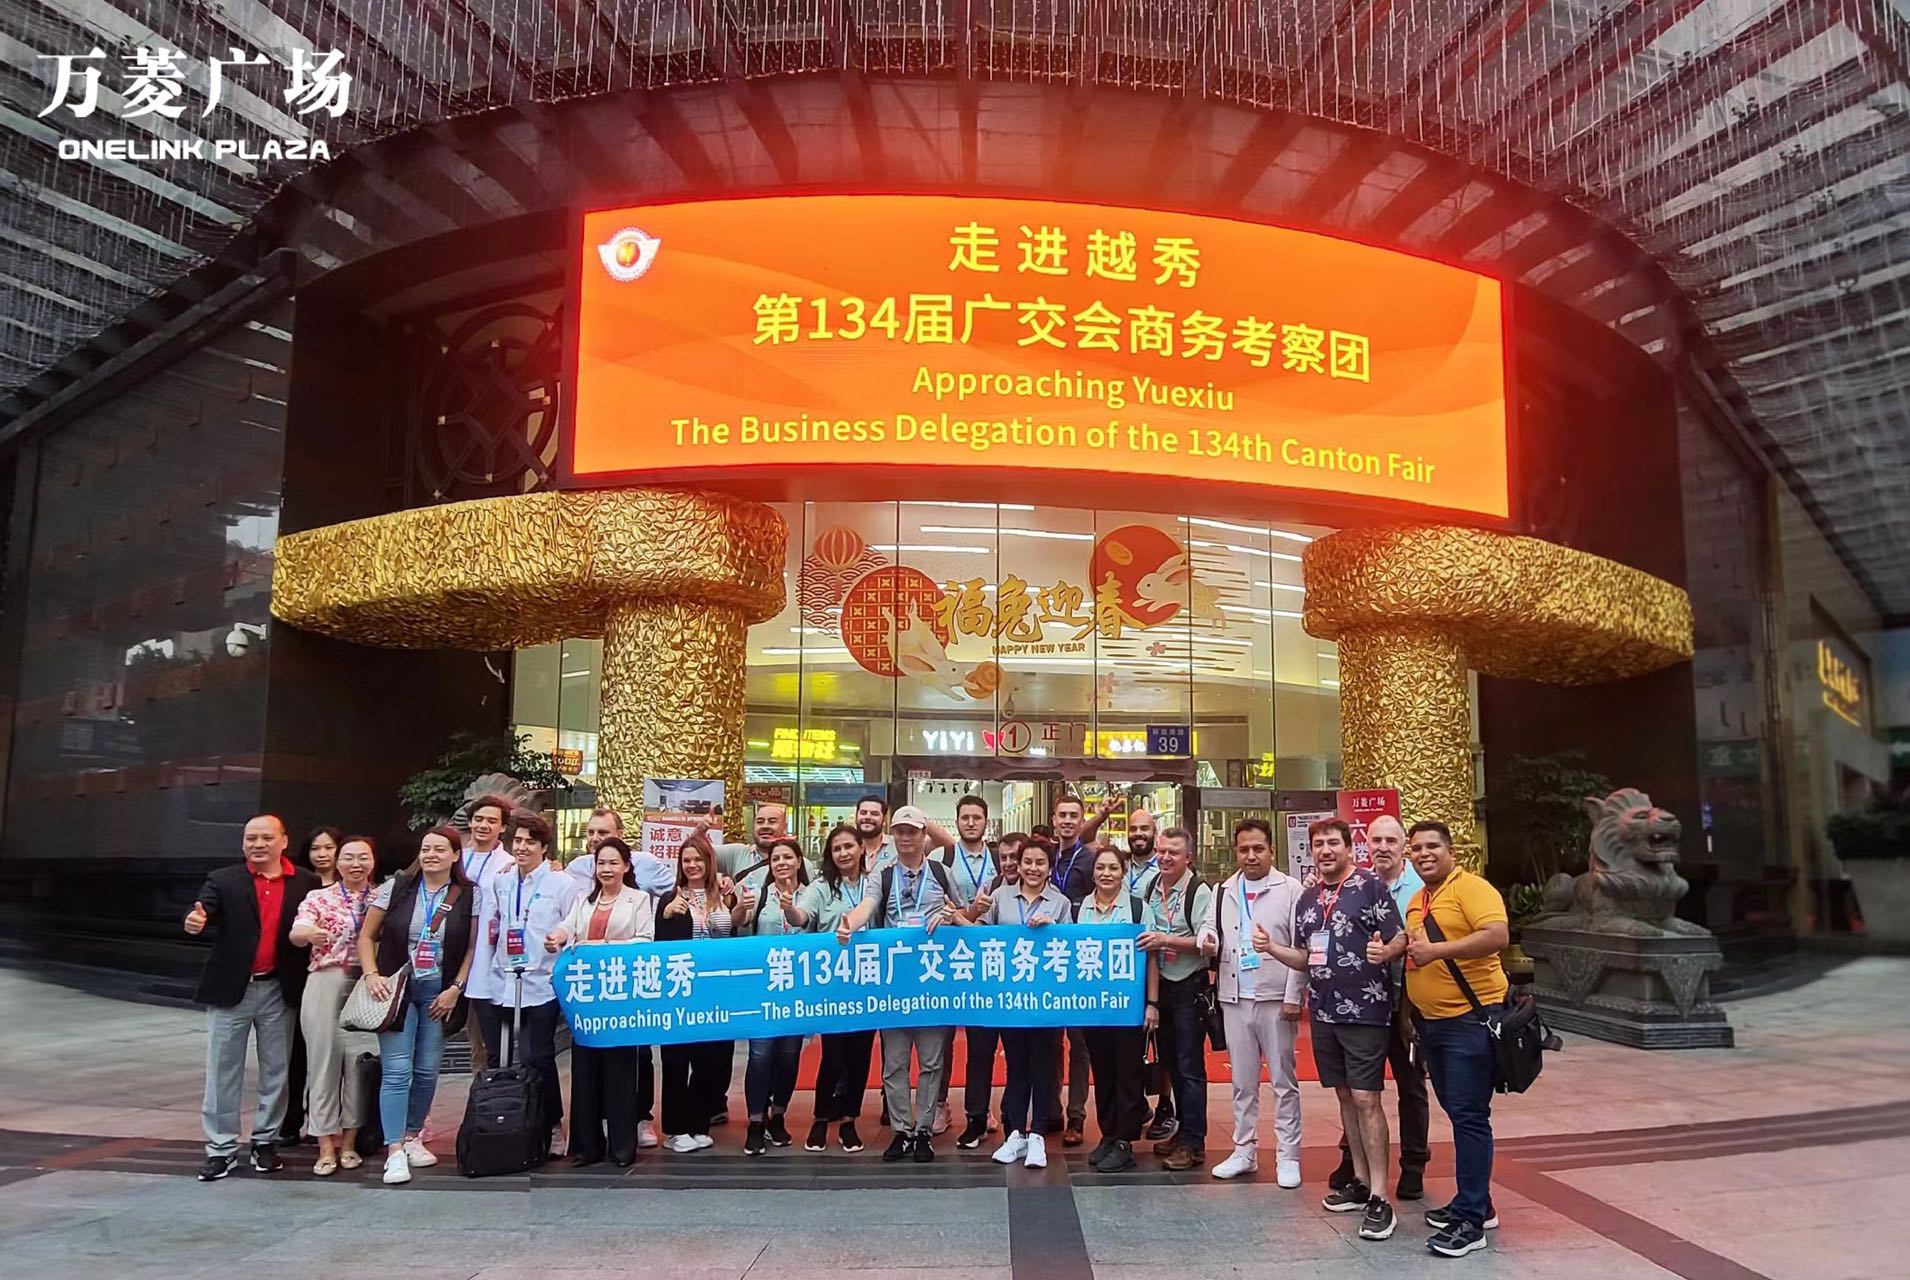 Guangjiao World ▪ Mutual Benefit for the World: The 134th Canton Fair Foreign Investment Enters the Characteristic Market of the Millennium Commercial Capital - Wanling Square